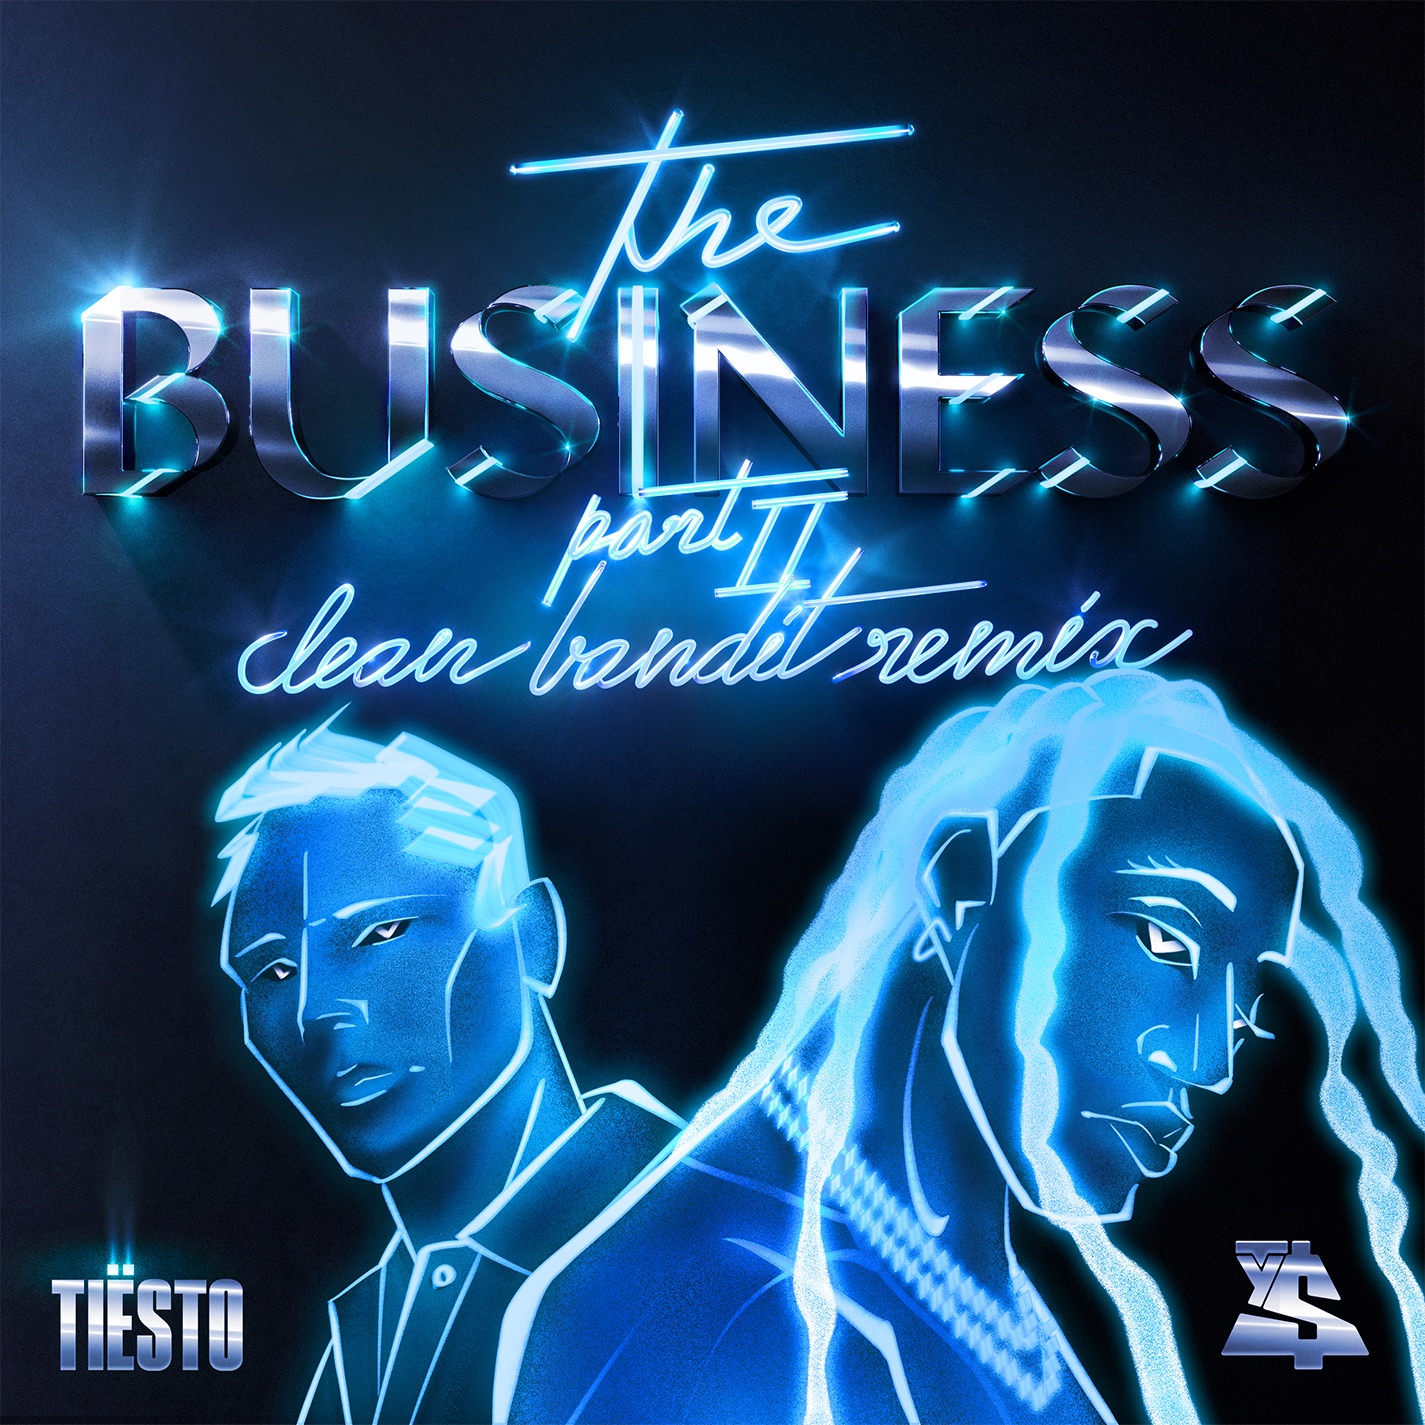 Tiësto & Ty Dolla $ign - The Business, Pt. II (Clean Bandit Remix) - Single